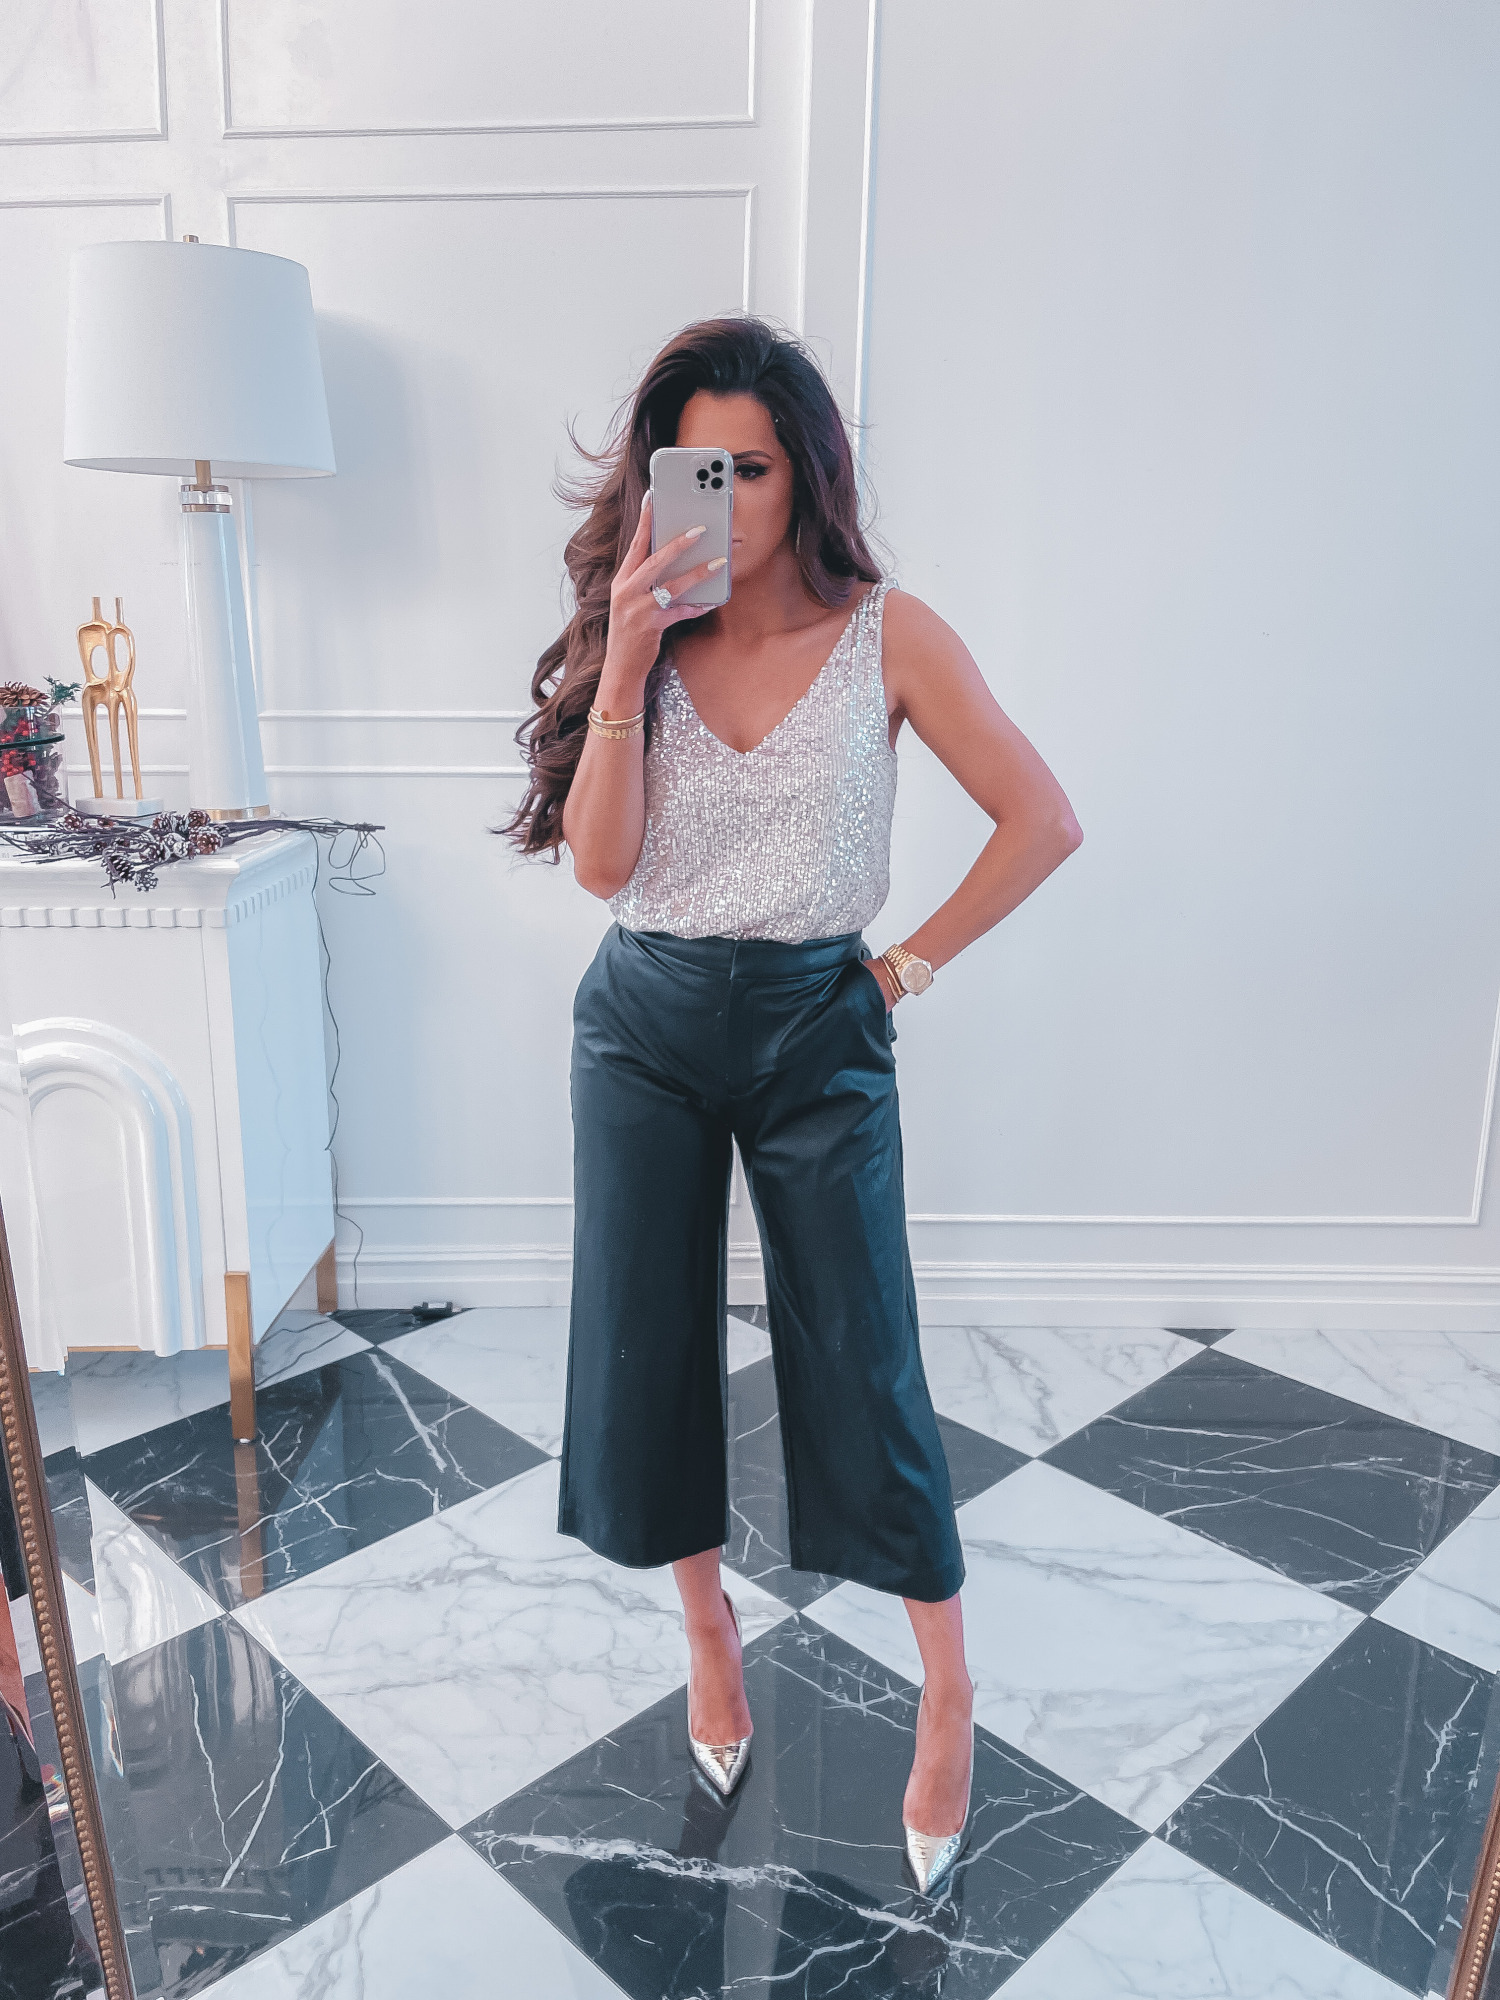 best black friday cyber monday sales 2020, top black friday sales 2020, emily gemma14 |2020 Black Friday Deals by popular US life and style blog, The Sweetest Thing: image of Emily Gemma wearing a silver sequin tank top, black leather culottes pants, and silver stiletto heels. 